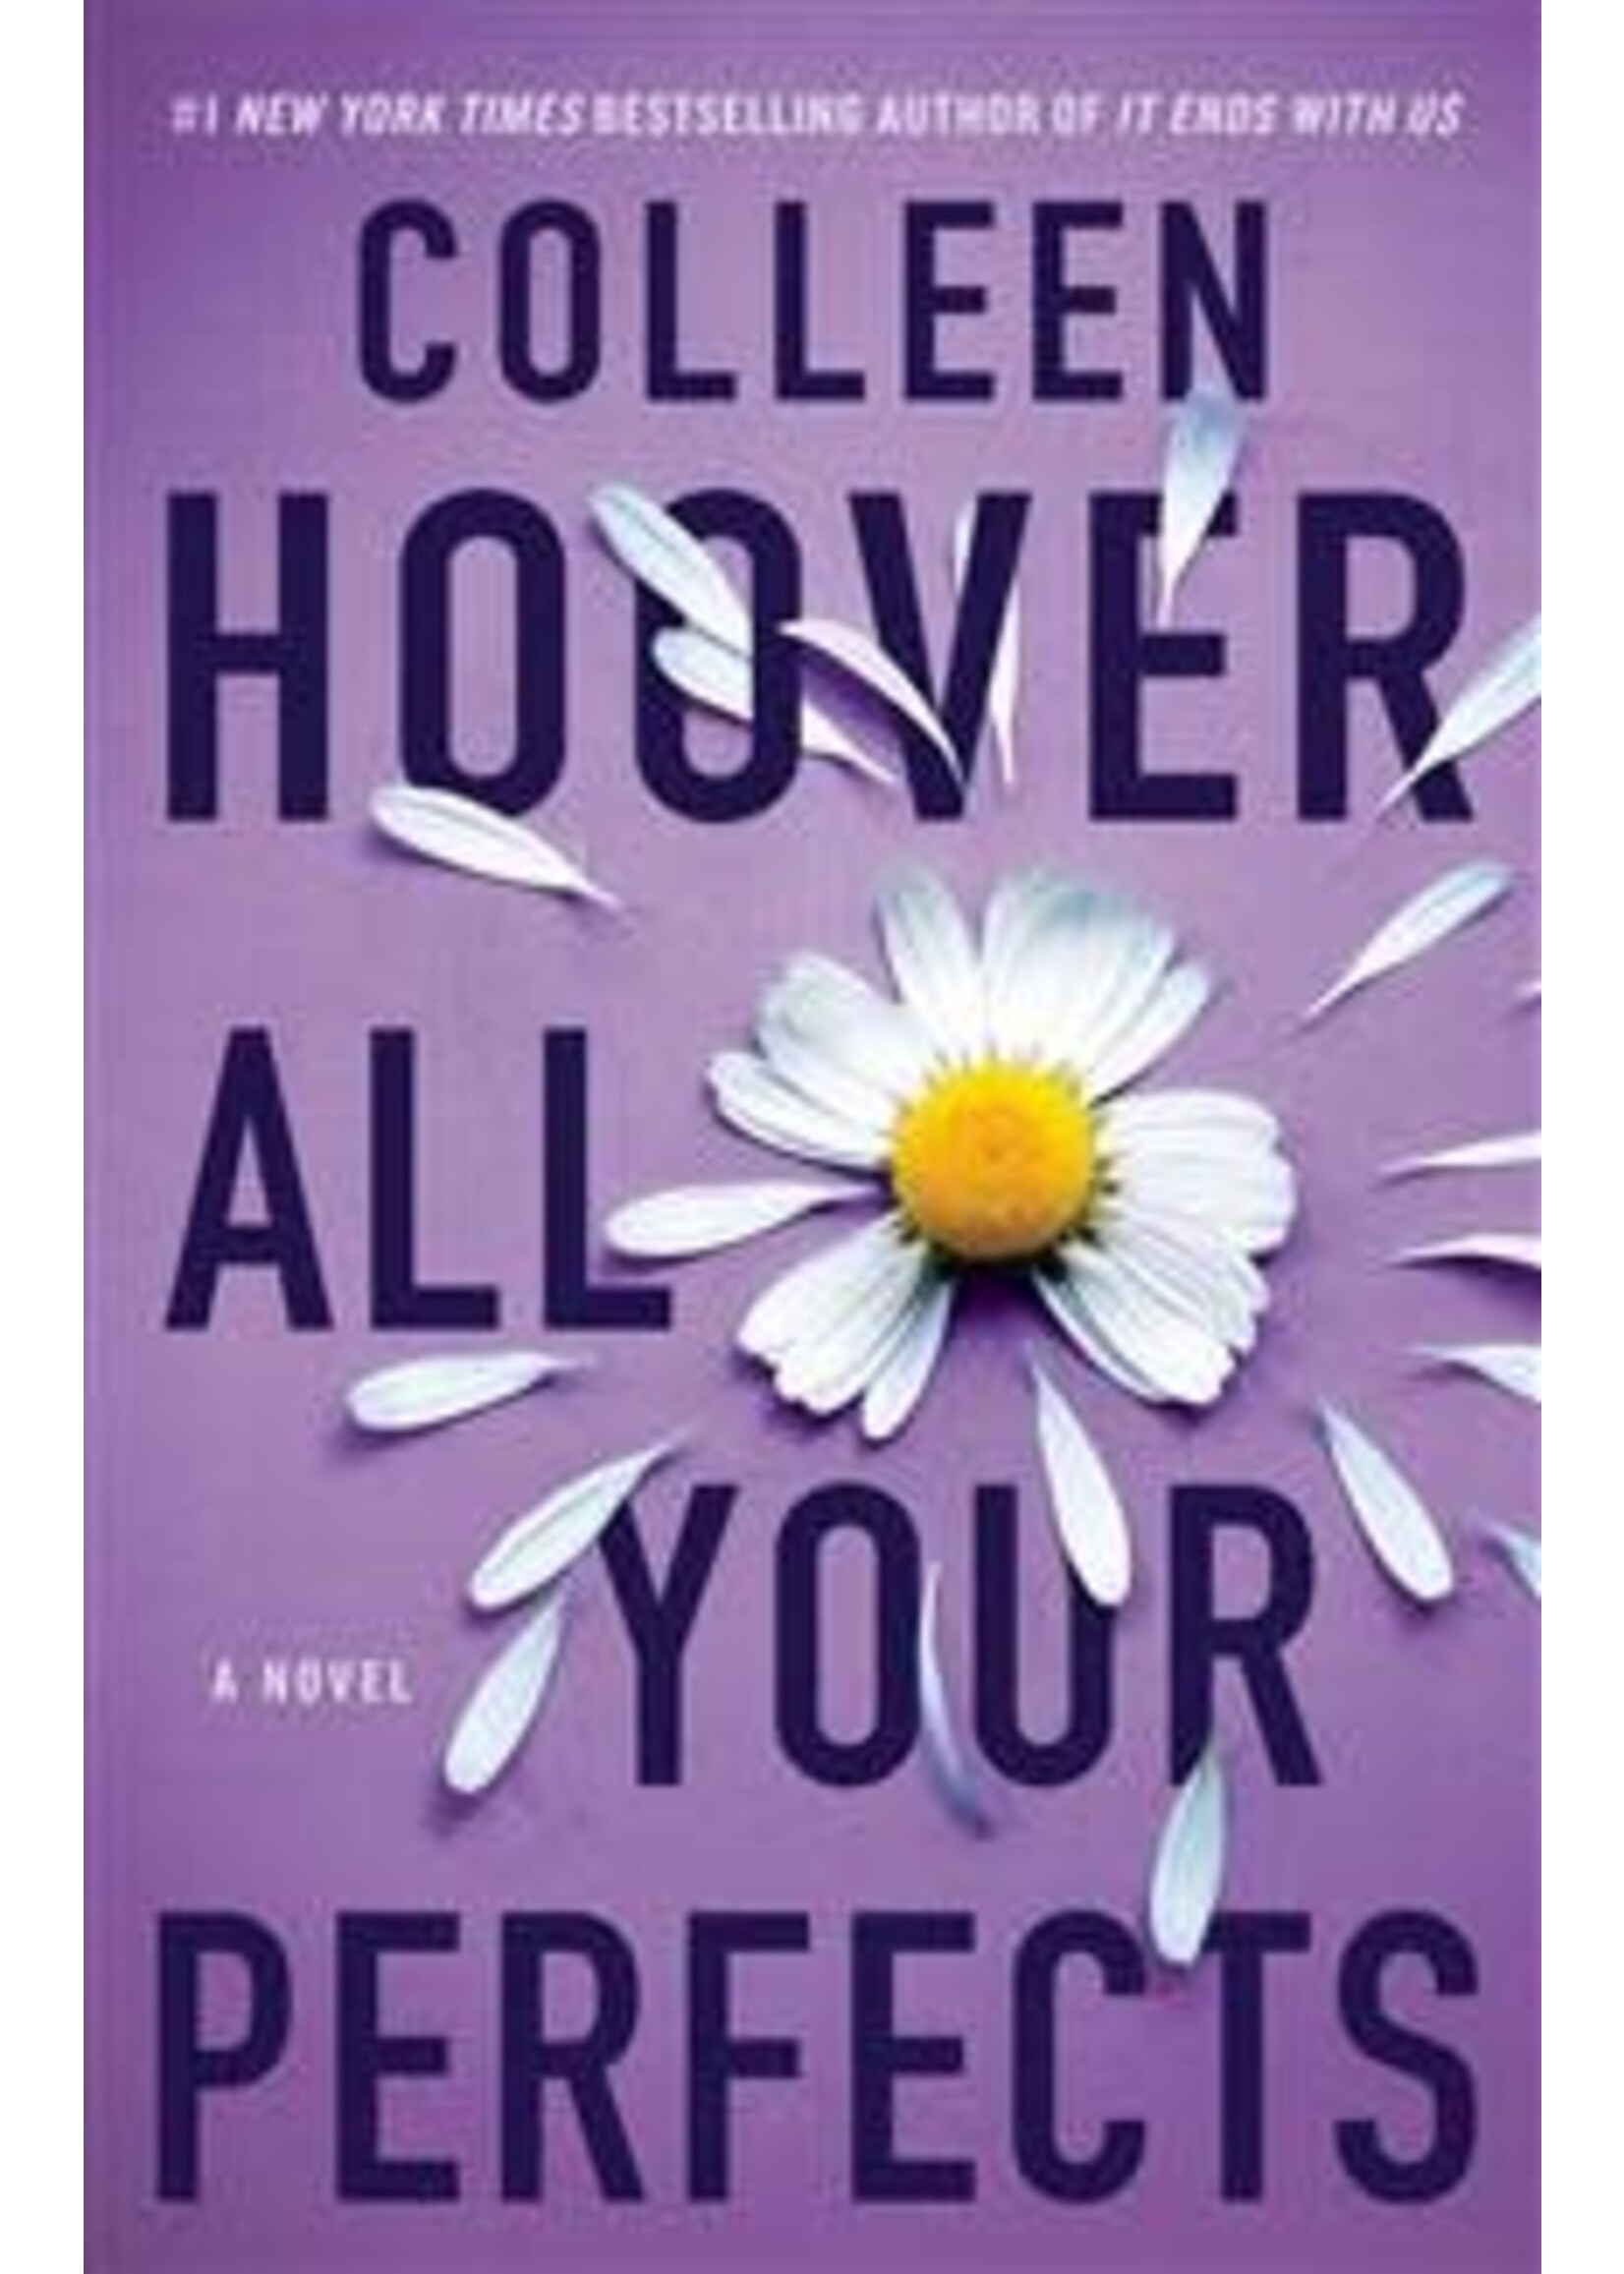 All Your Perfects (Hopeless #4) by Colleen Hoover